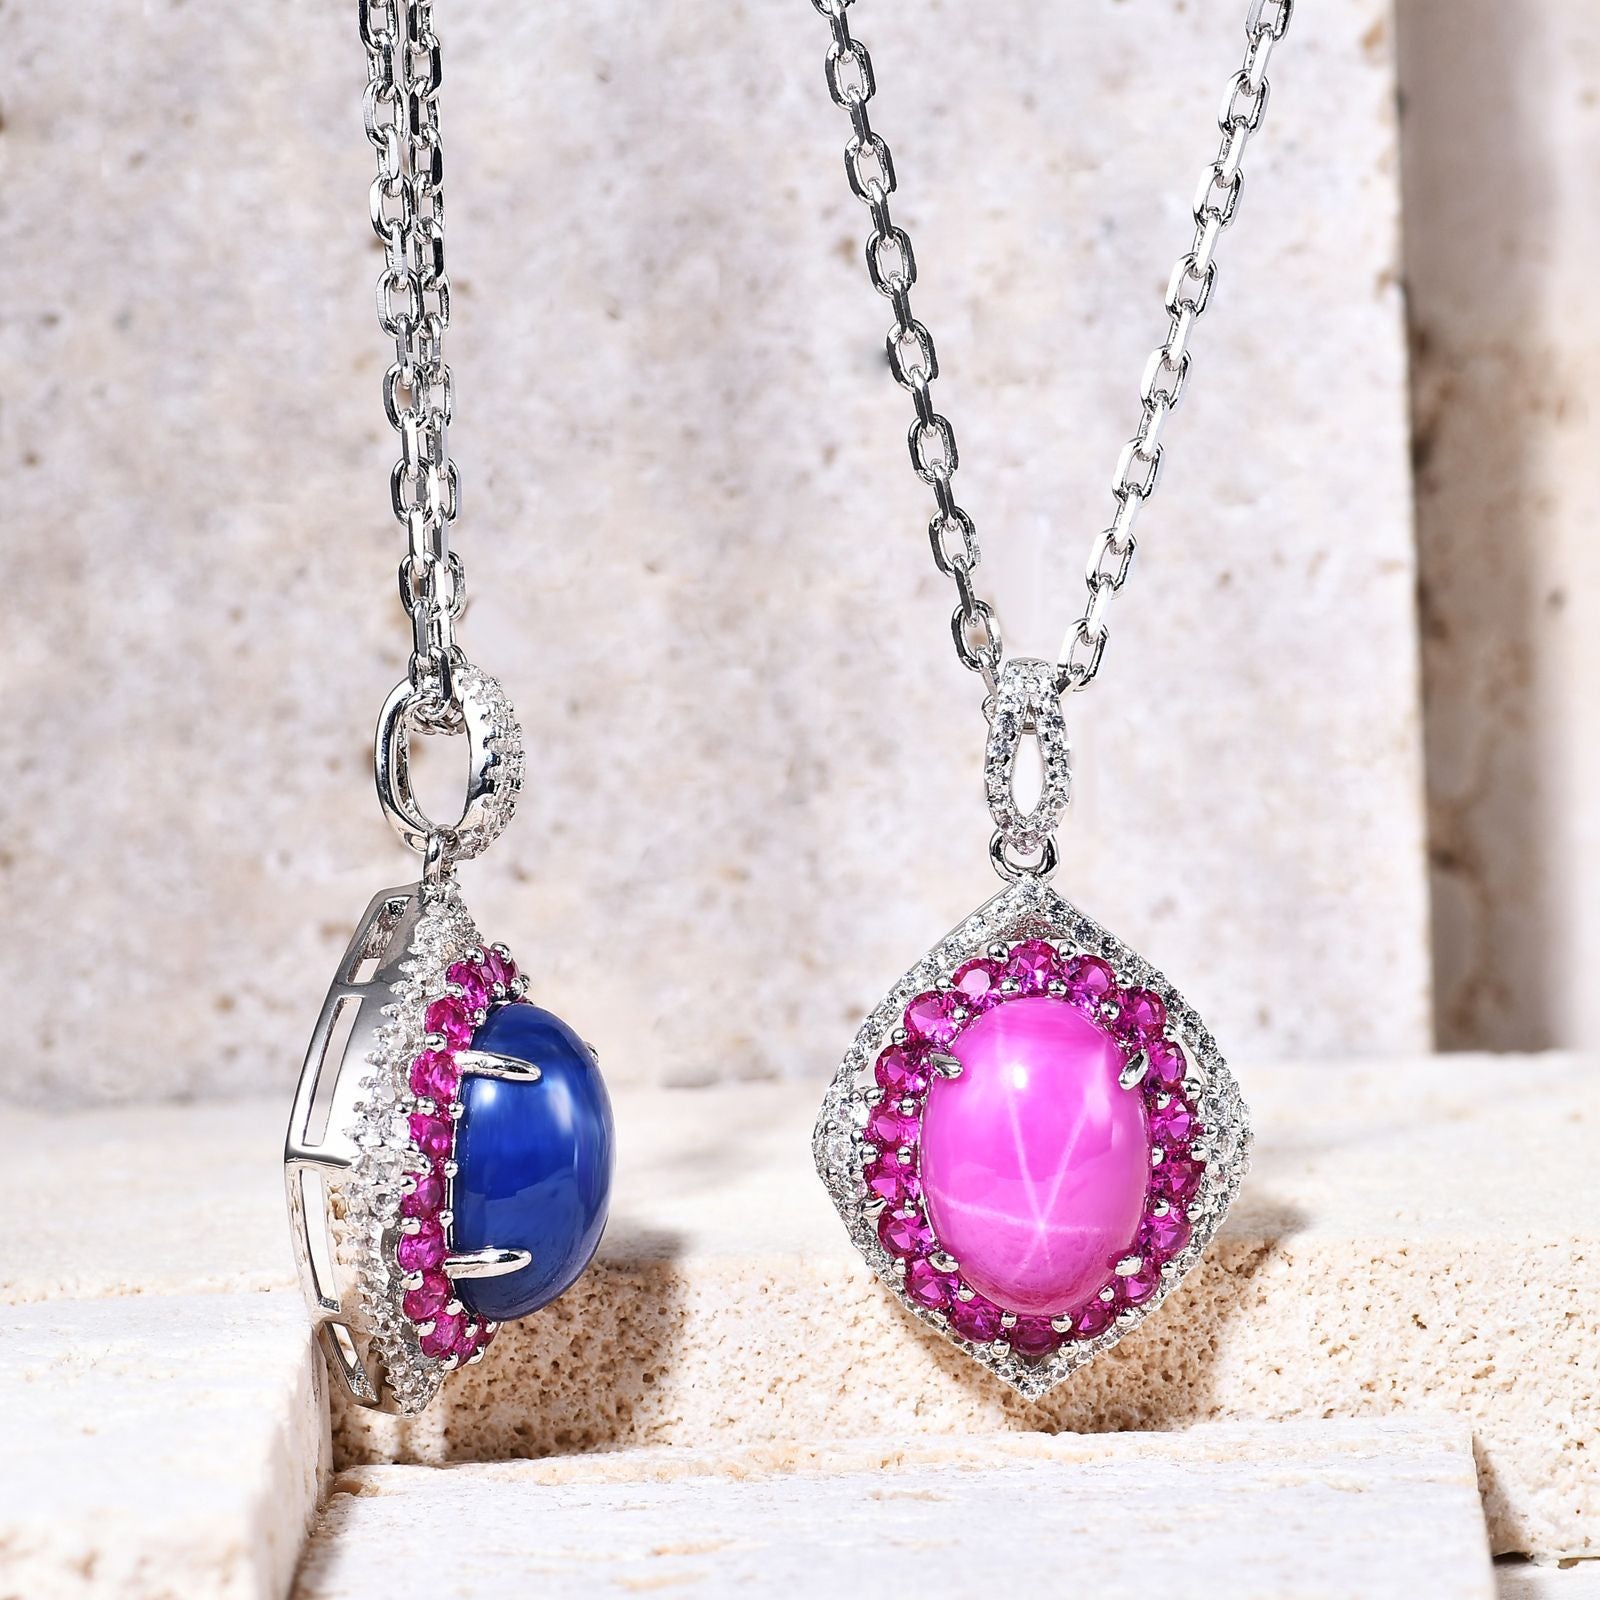 European Fashion Luxury Jewelry Design Six Starlight Surround Inlay Colourful Gemstone with Synthetic Gemstone Soleste Halo Oval Pendant Silver Necklace for Women